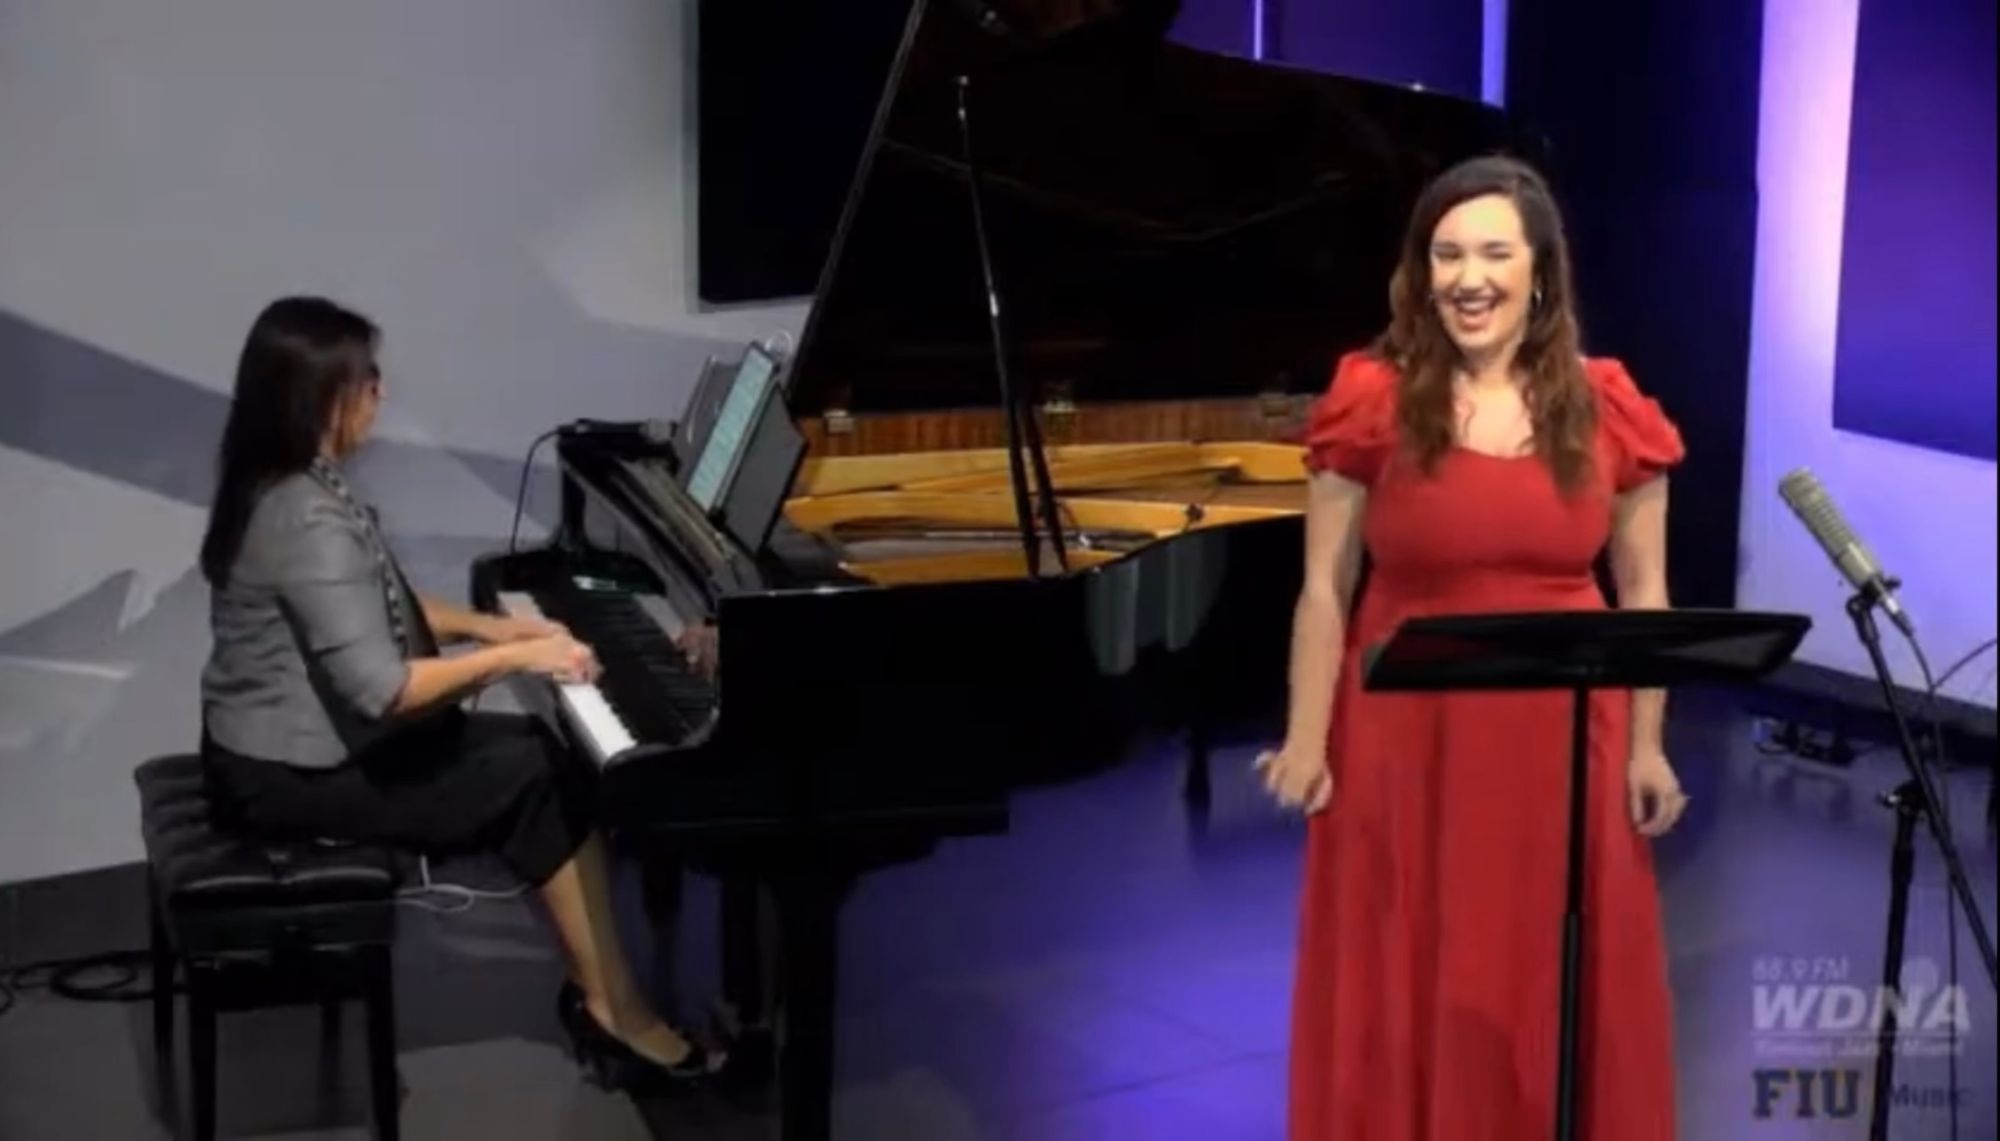 Catherine performing "Art is Calling for Me" on WDNA 88.9 FM. She was a featured alumni vocalist on the FIU Music Hour as part of FIU Alumni Week. Featured: Dr. Vindhya Khare, piano